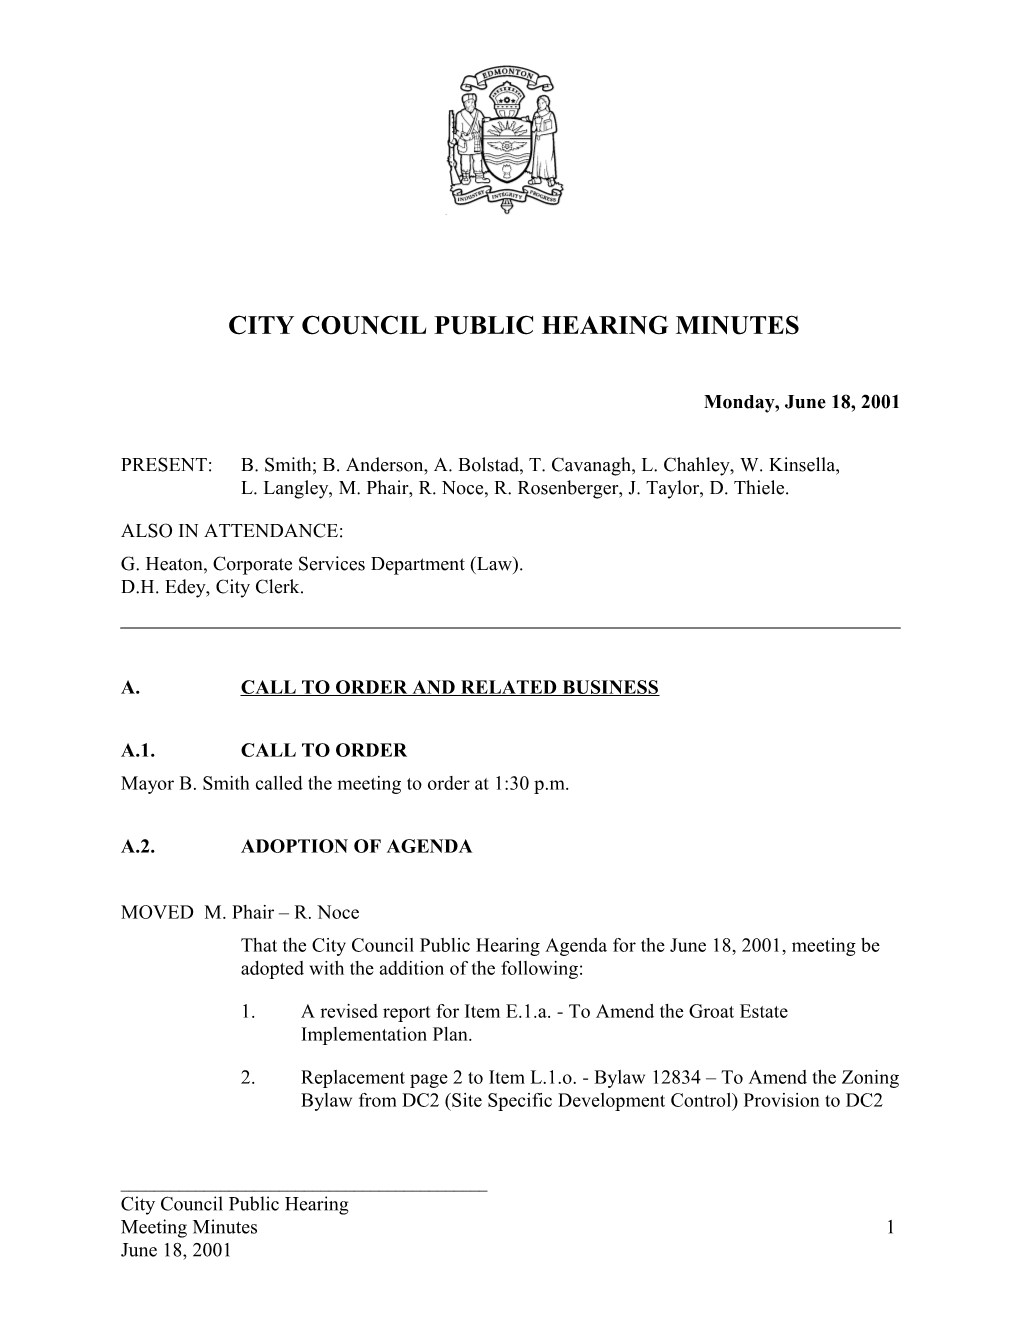 Minutes for City Council June 18, 2001 Meeting